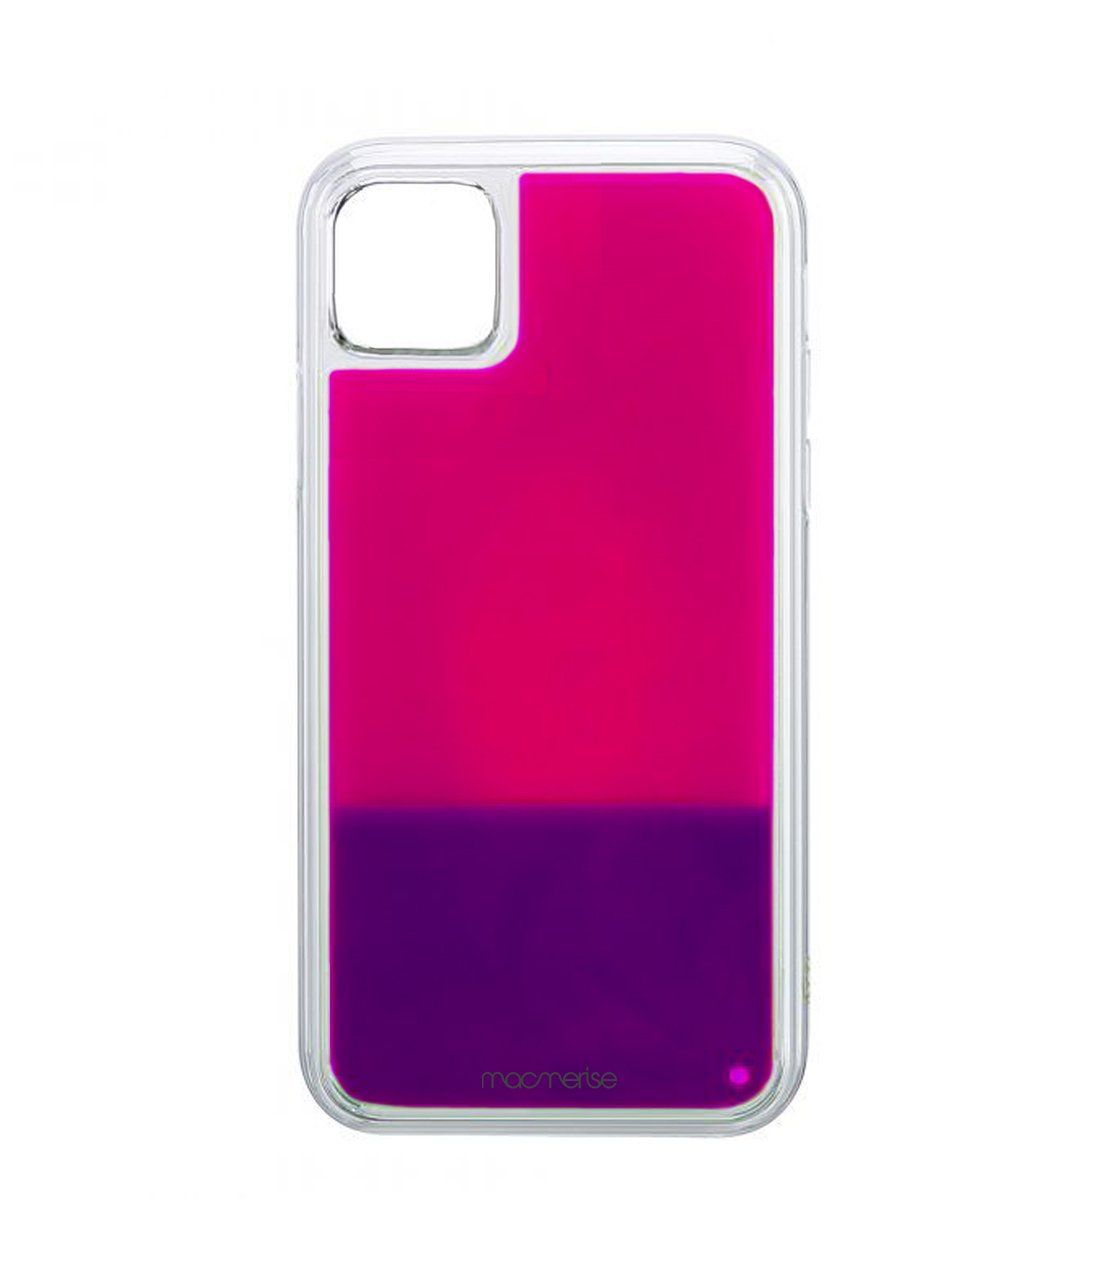 Neon Sand Purple Pink - Neon Sand Phone Case for iPhone 11